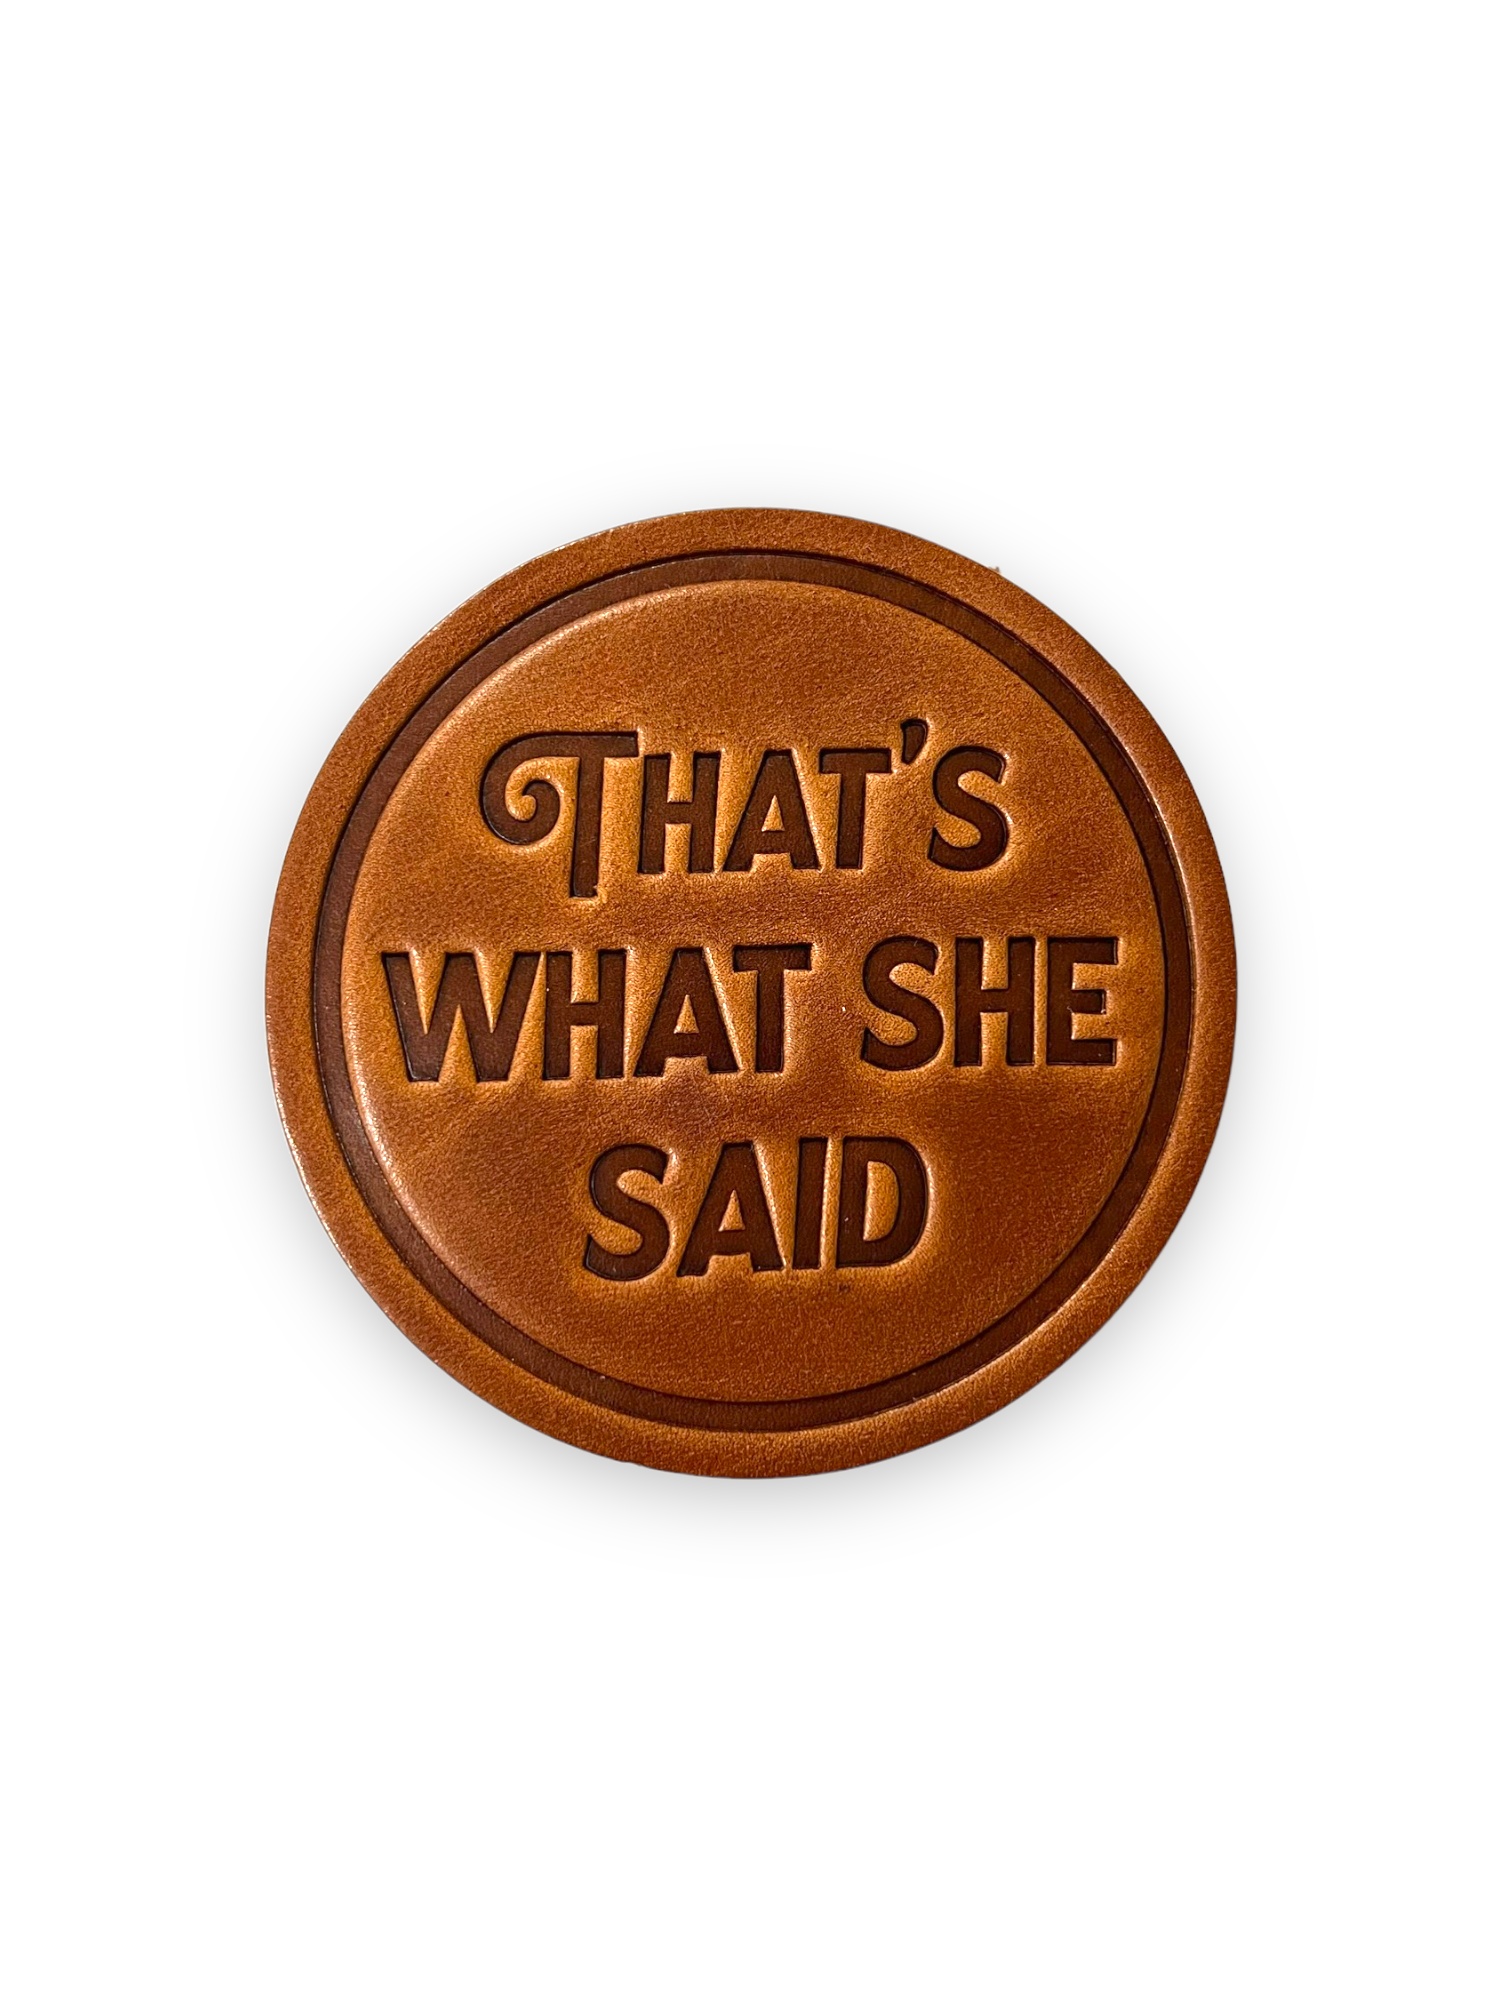 That's What She Said Genuine Leather Handstamped Coaster by Sugarhouse Leather Sold by Le Monkey House